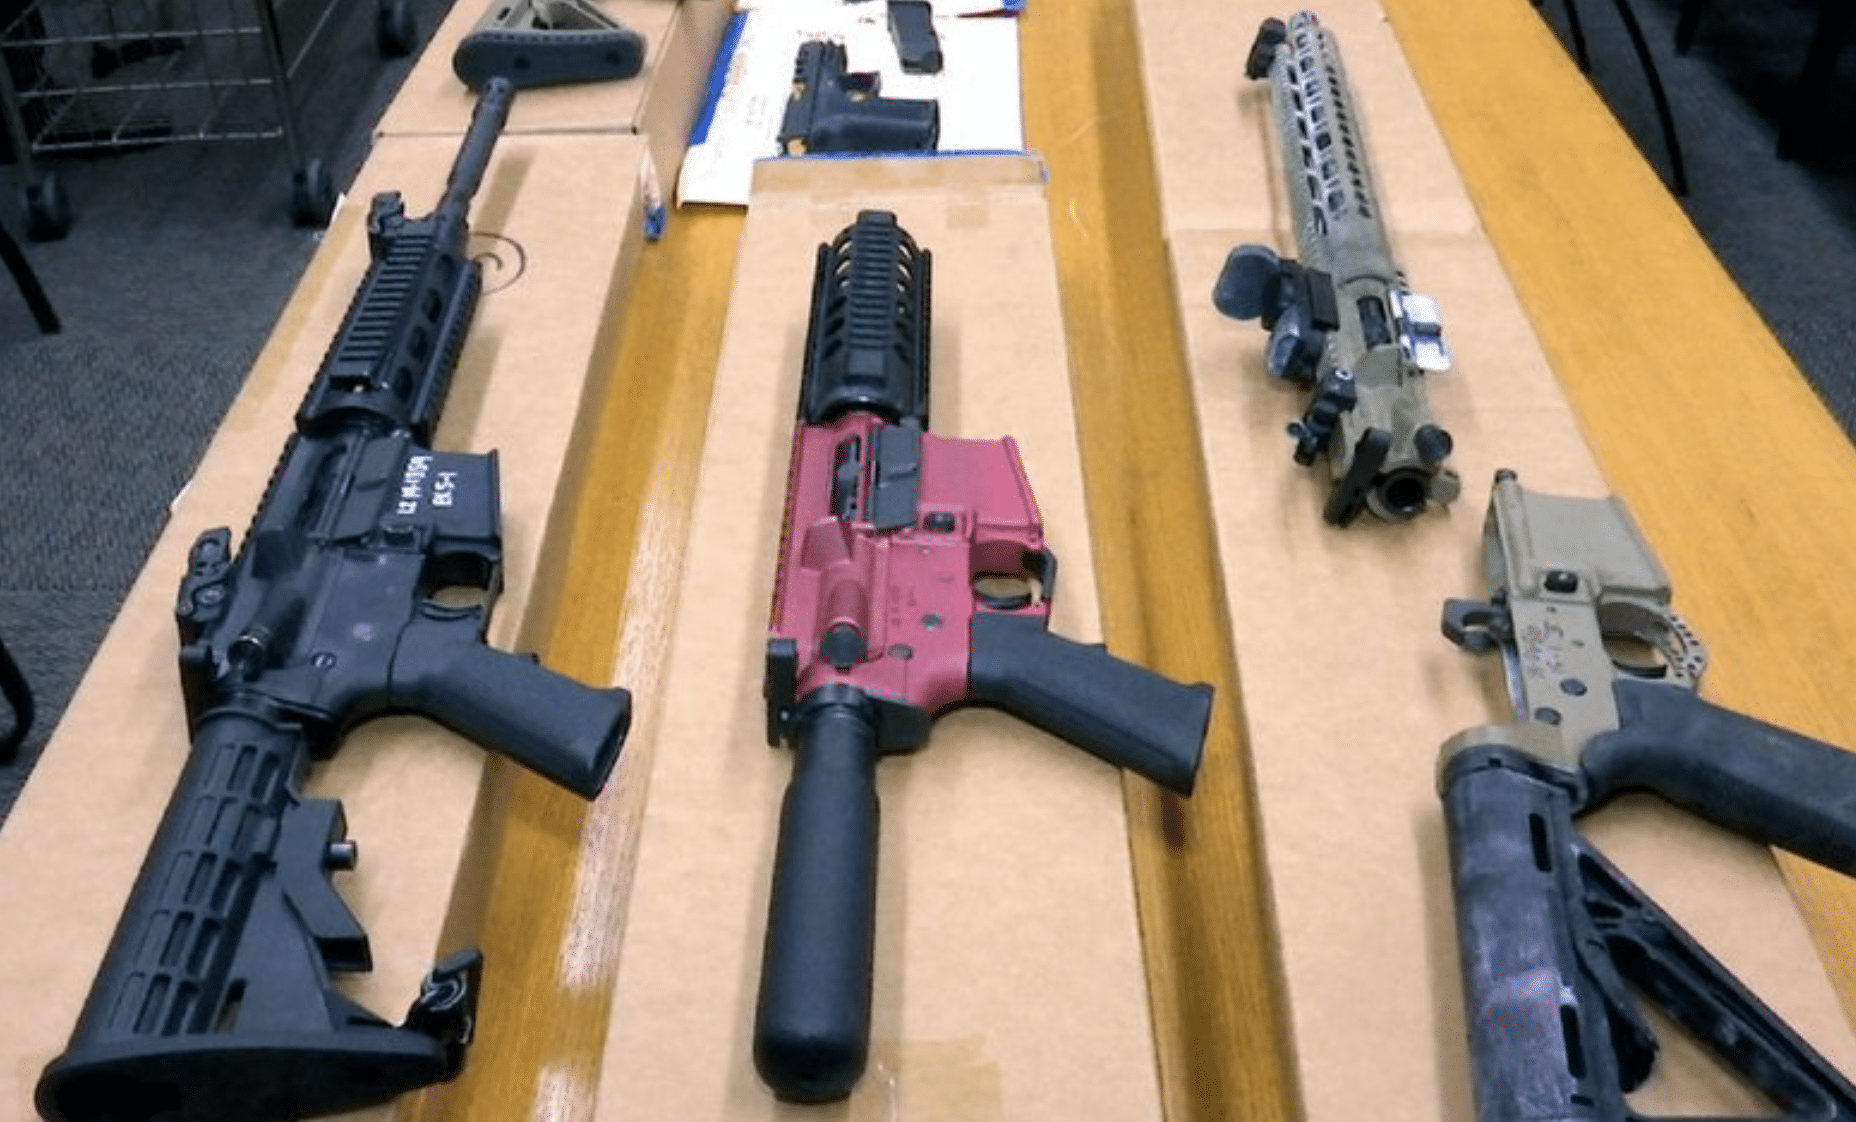 Federal Charges Reveal Incel National Guard Member, Thomas Develin and James Meade Had 3D Printed Ghost Guns, IEDs, and Plans To Assault Wright Patterson Air Force Base in Ohio